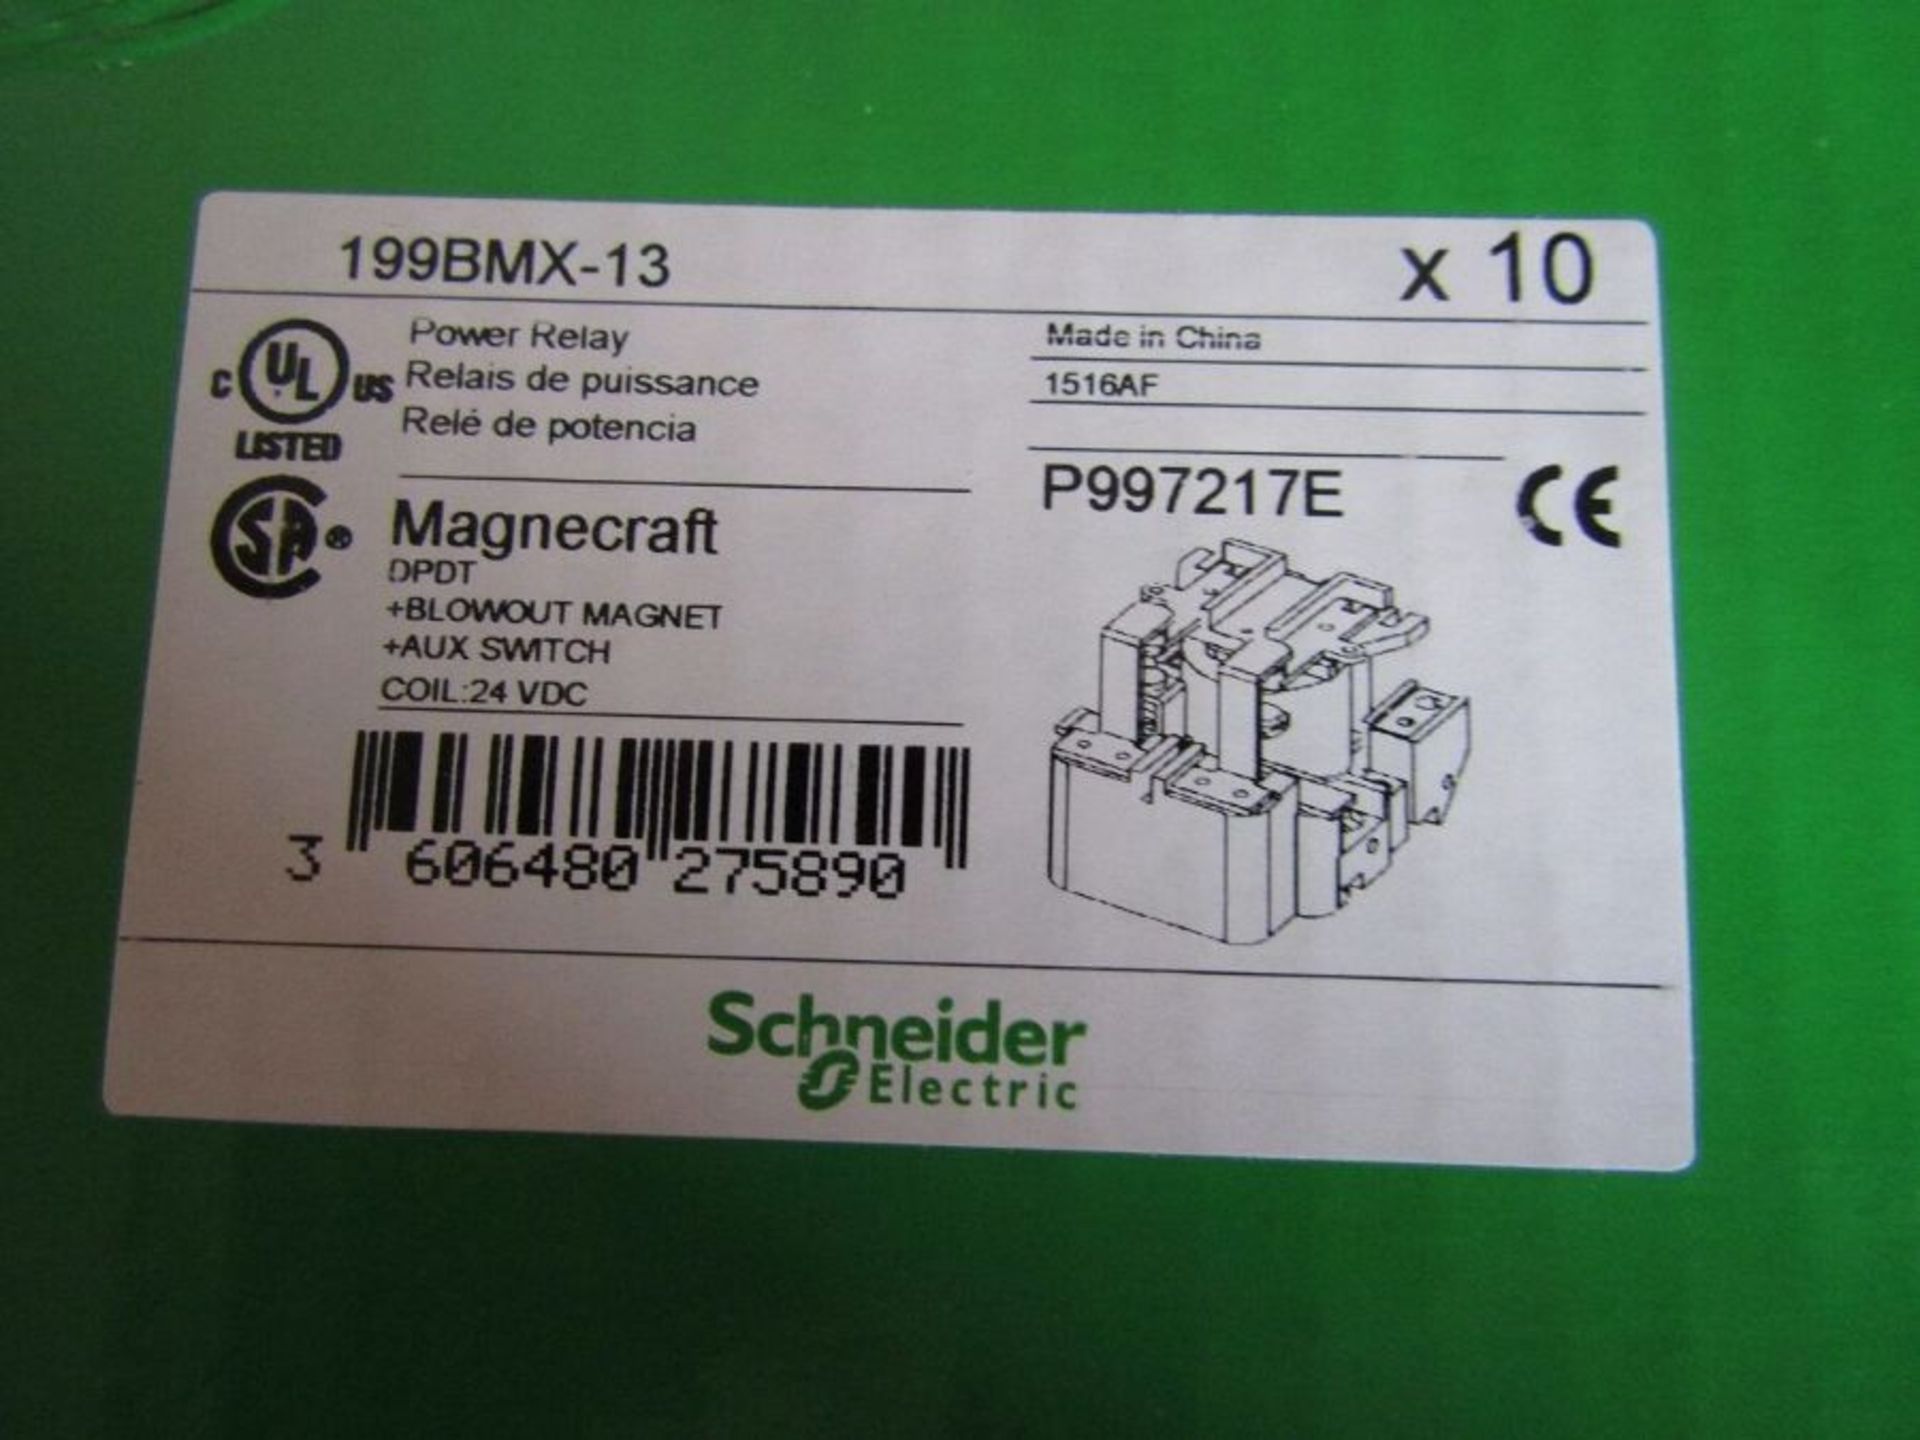 100 x Schneider DPDT Chassis Mount Non-Latching Relay 40A 24Vdc 05R £2k at cost 8245838